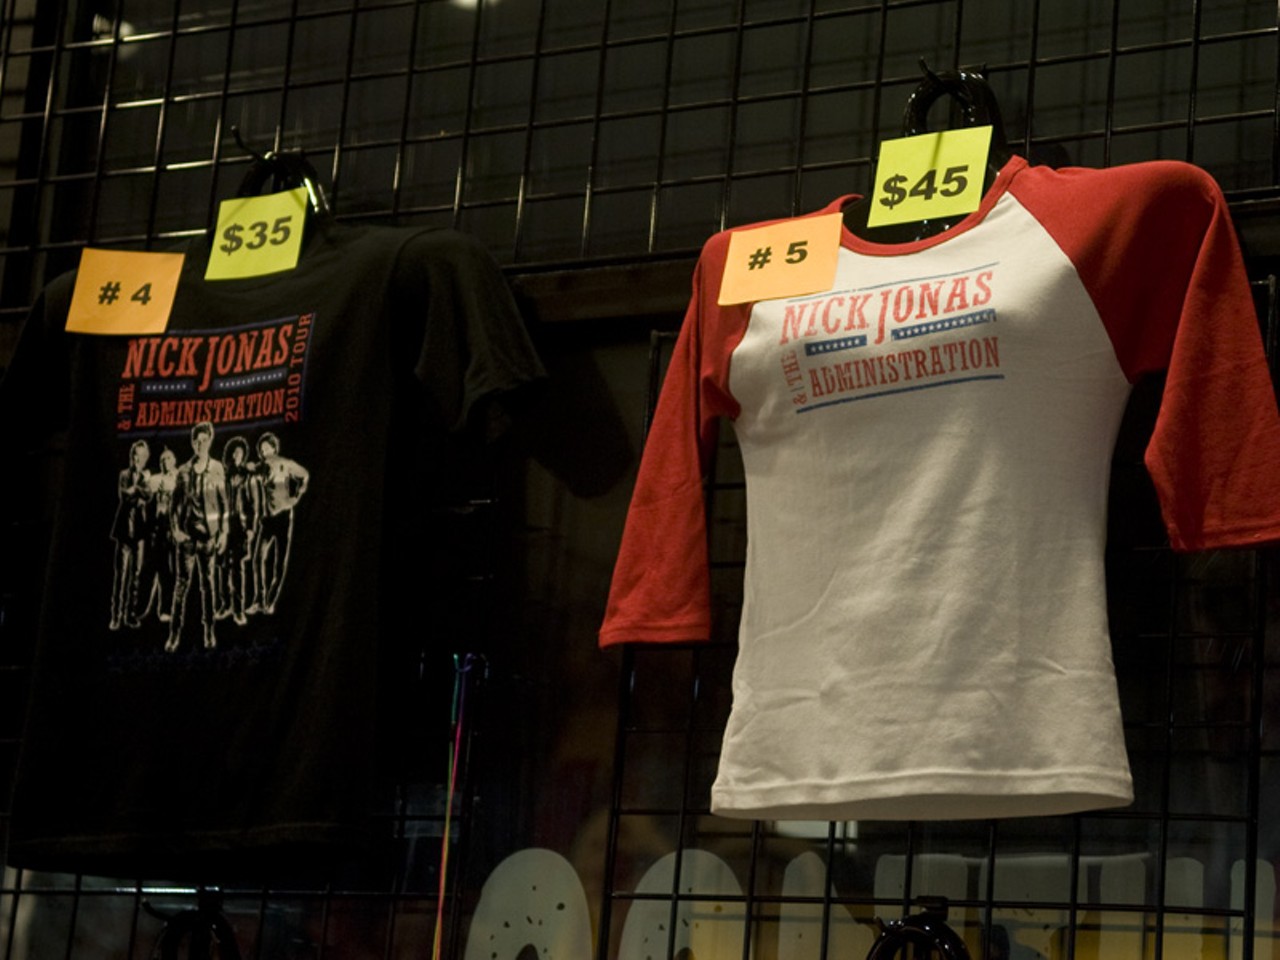 A Nick Jonas and the Administration T-shirt for sale last night.